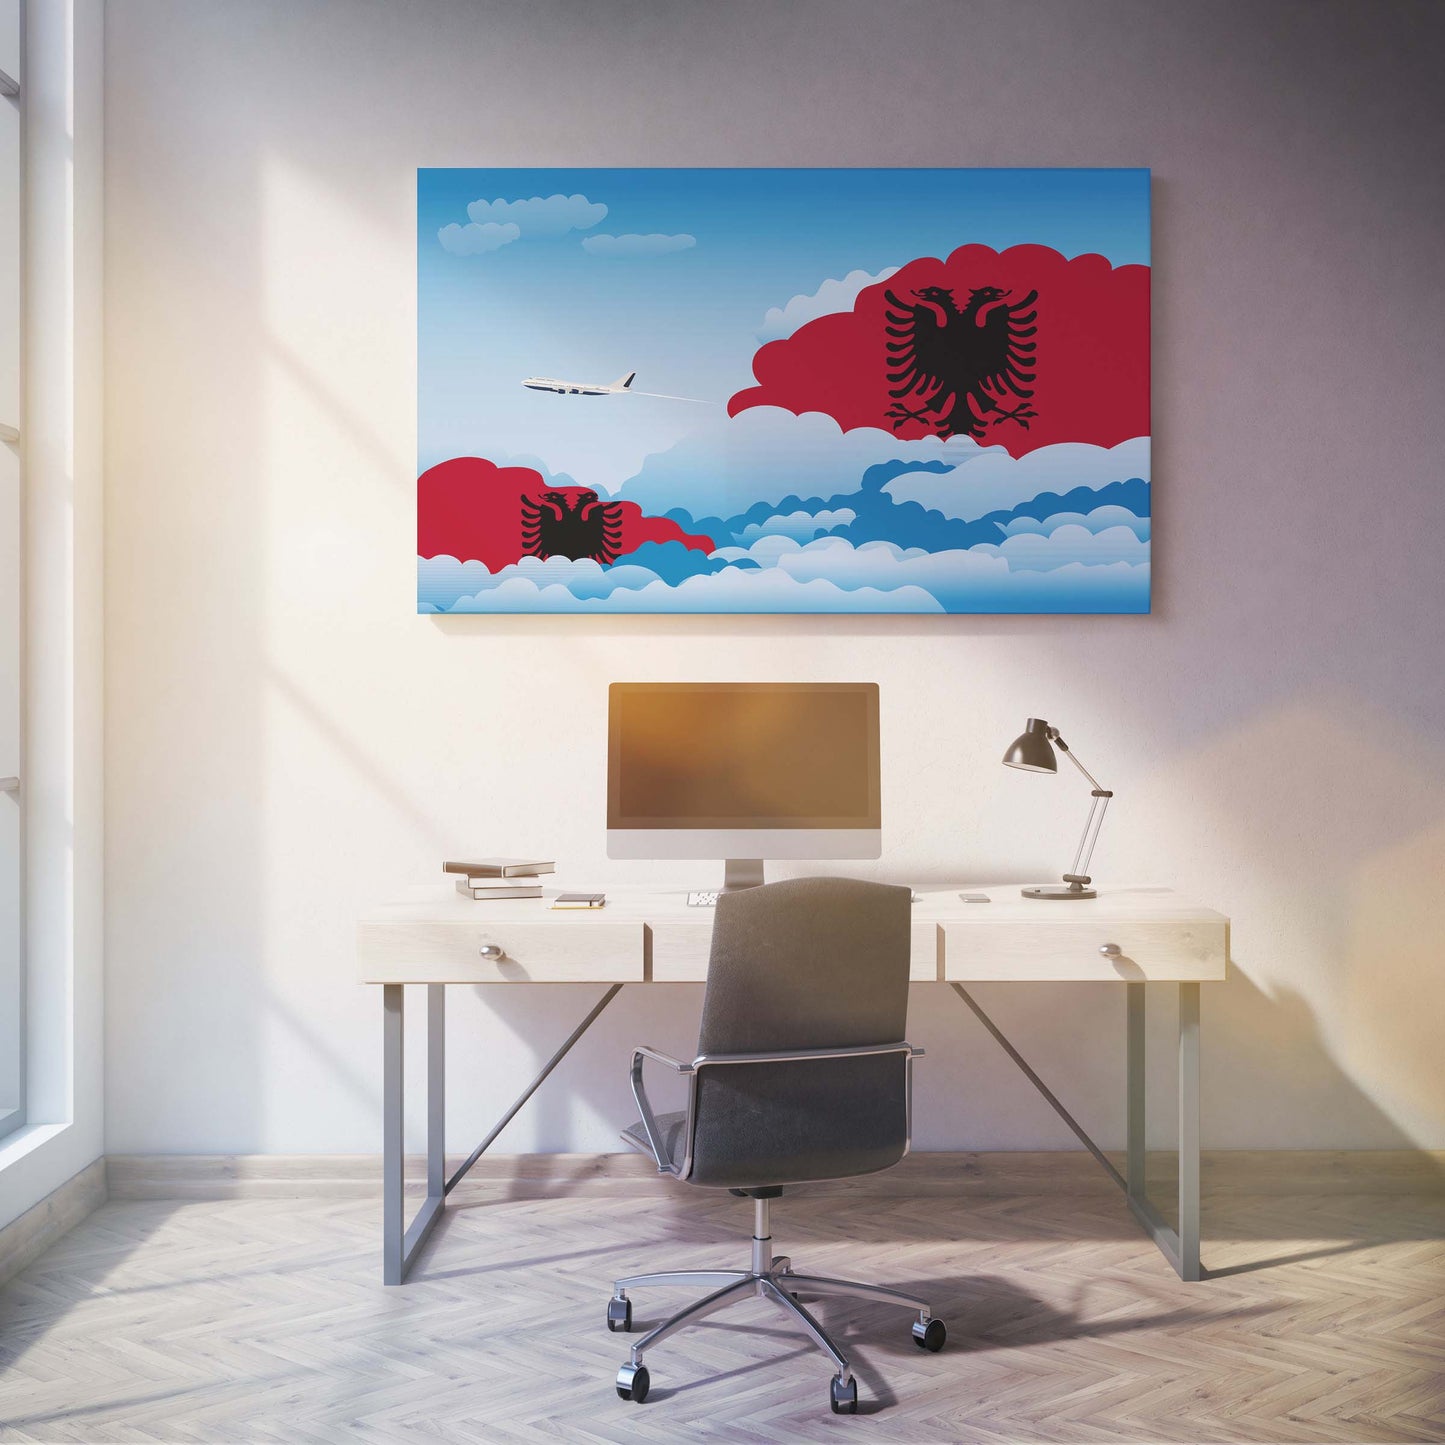 Albania Flags Day Clouds Canvas Print Framed